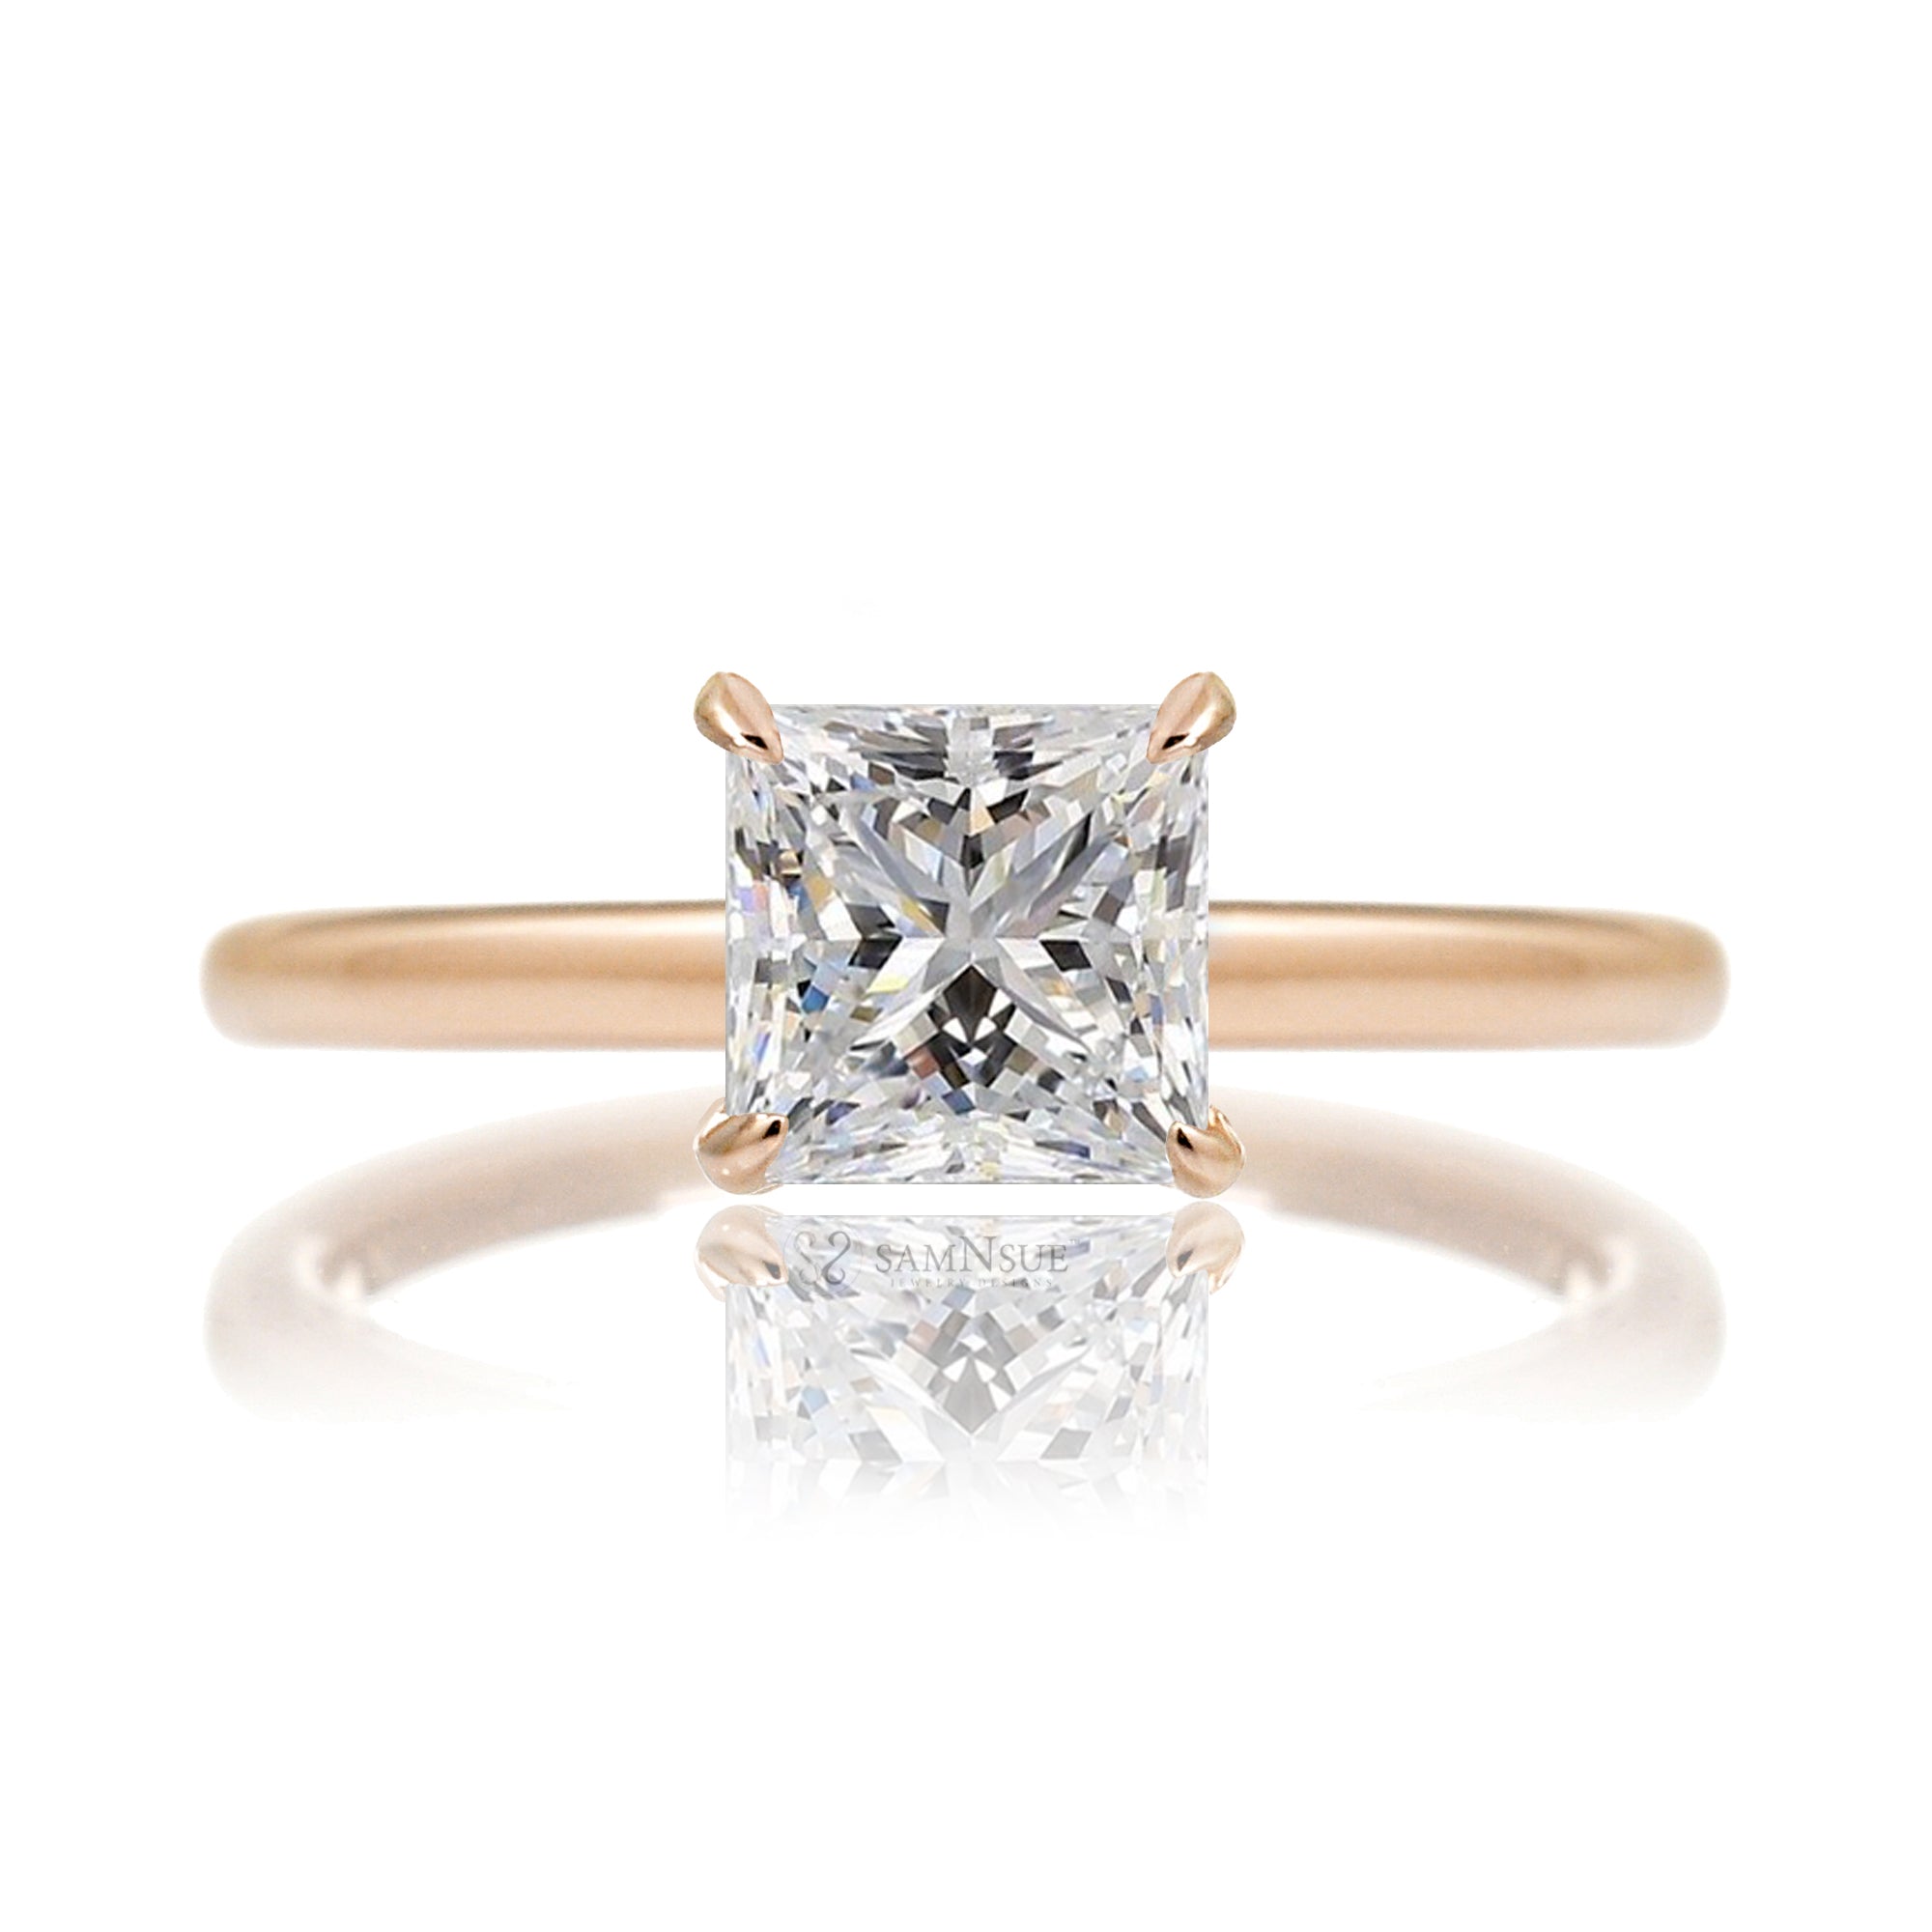 Princess cut solitaire diamond engagement ring with a hidden halo and solid polished band in rose gold